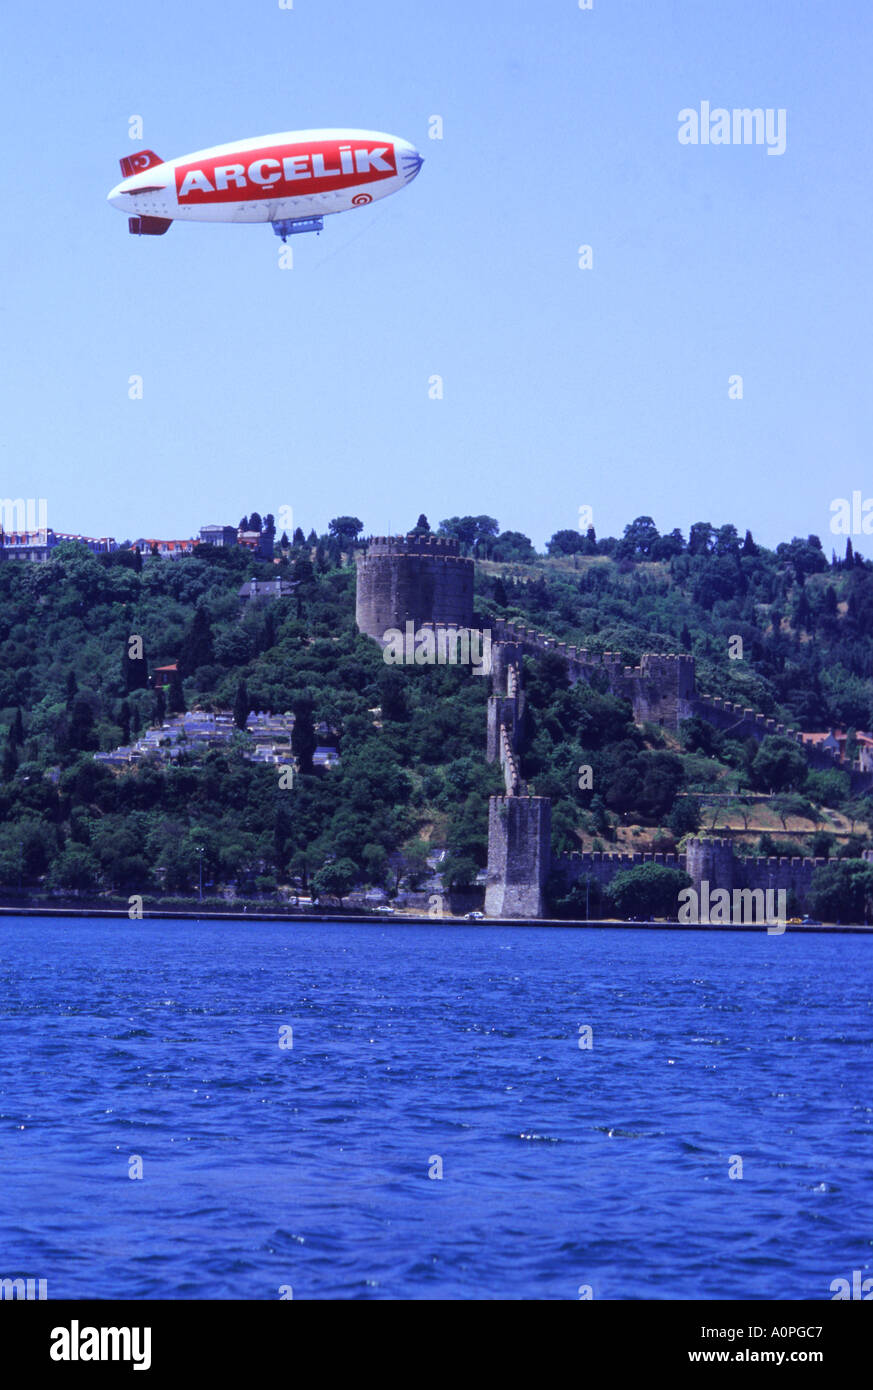 Arcelik Airship Cruises Over The Bosphorus Waterway with Rumel Hisari Fort In the Background Stock Photo